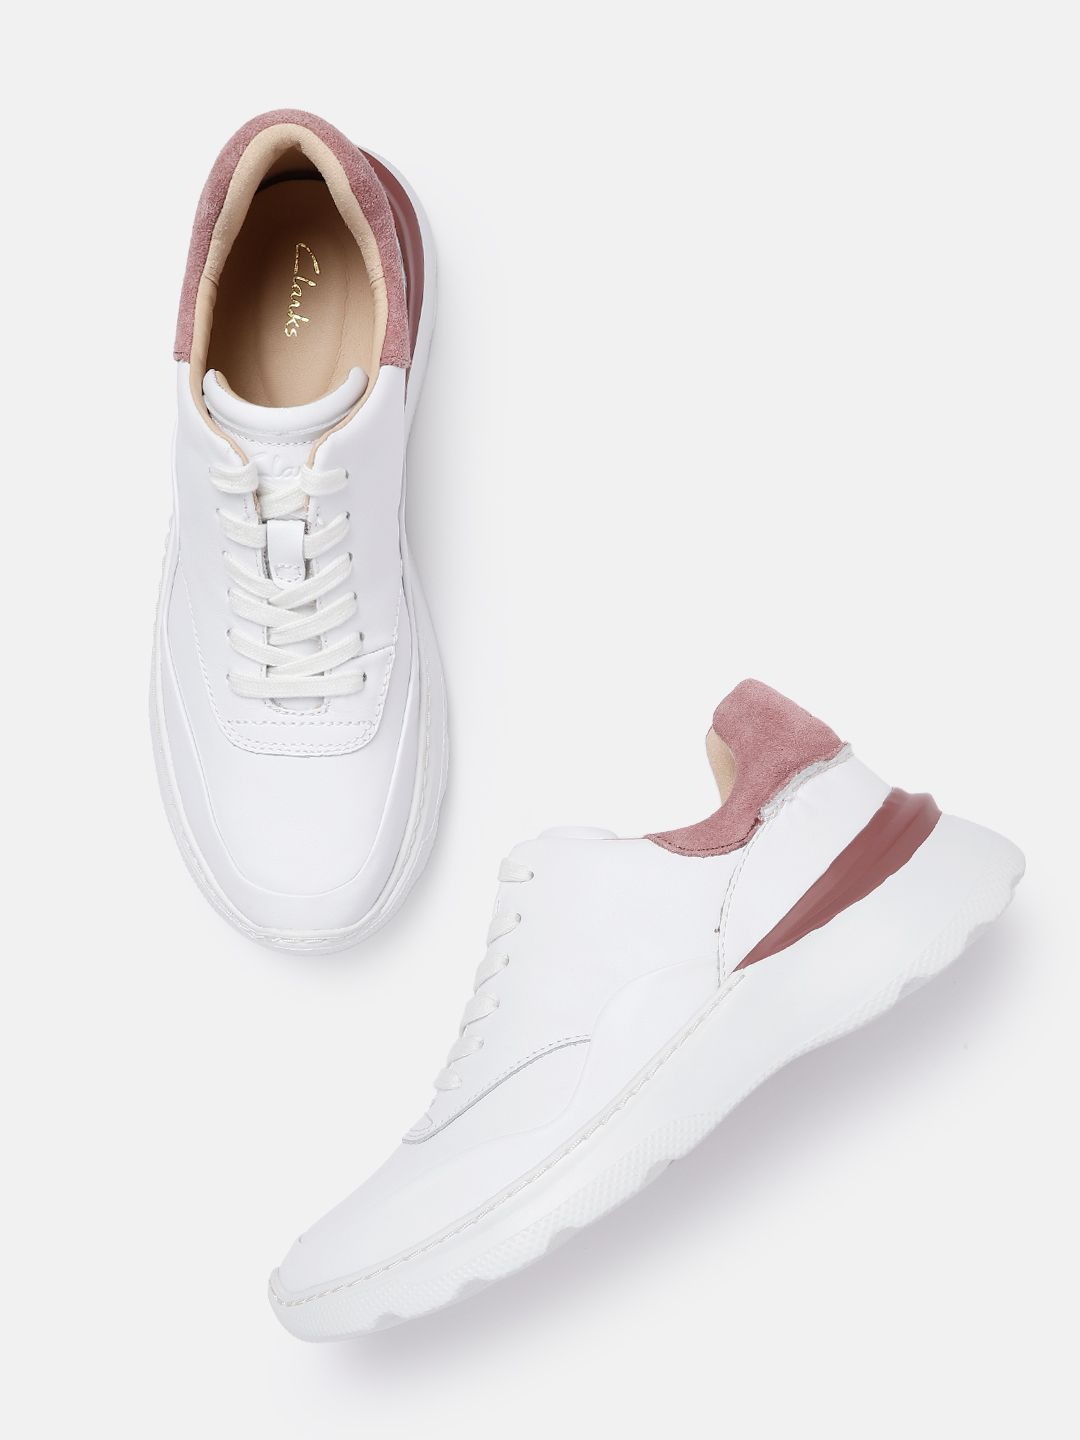 Clarks Women White Solid Leather Sneakers Price in India